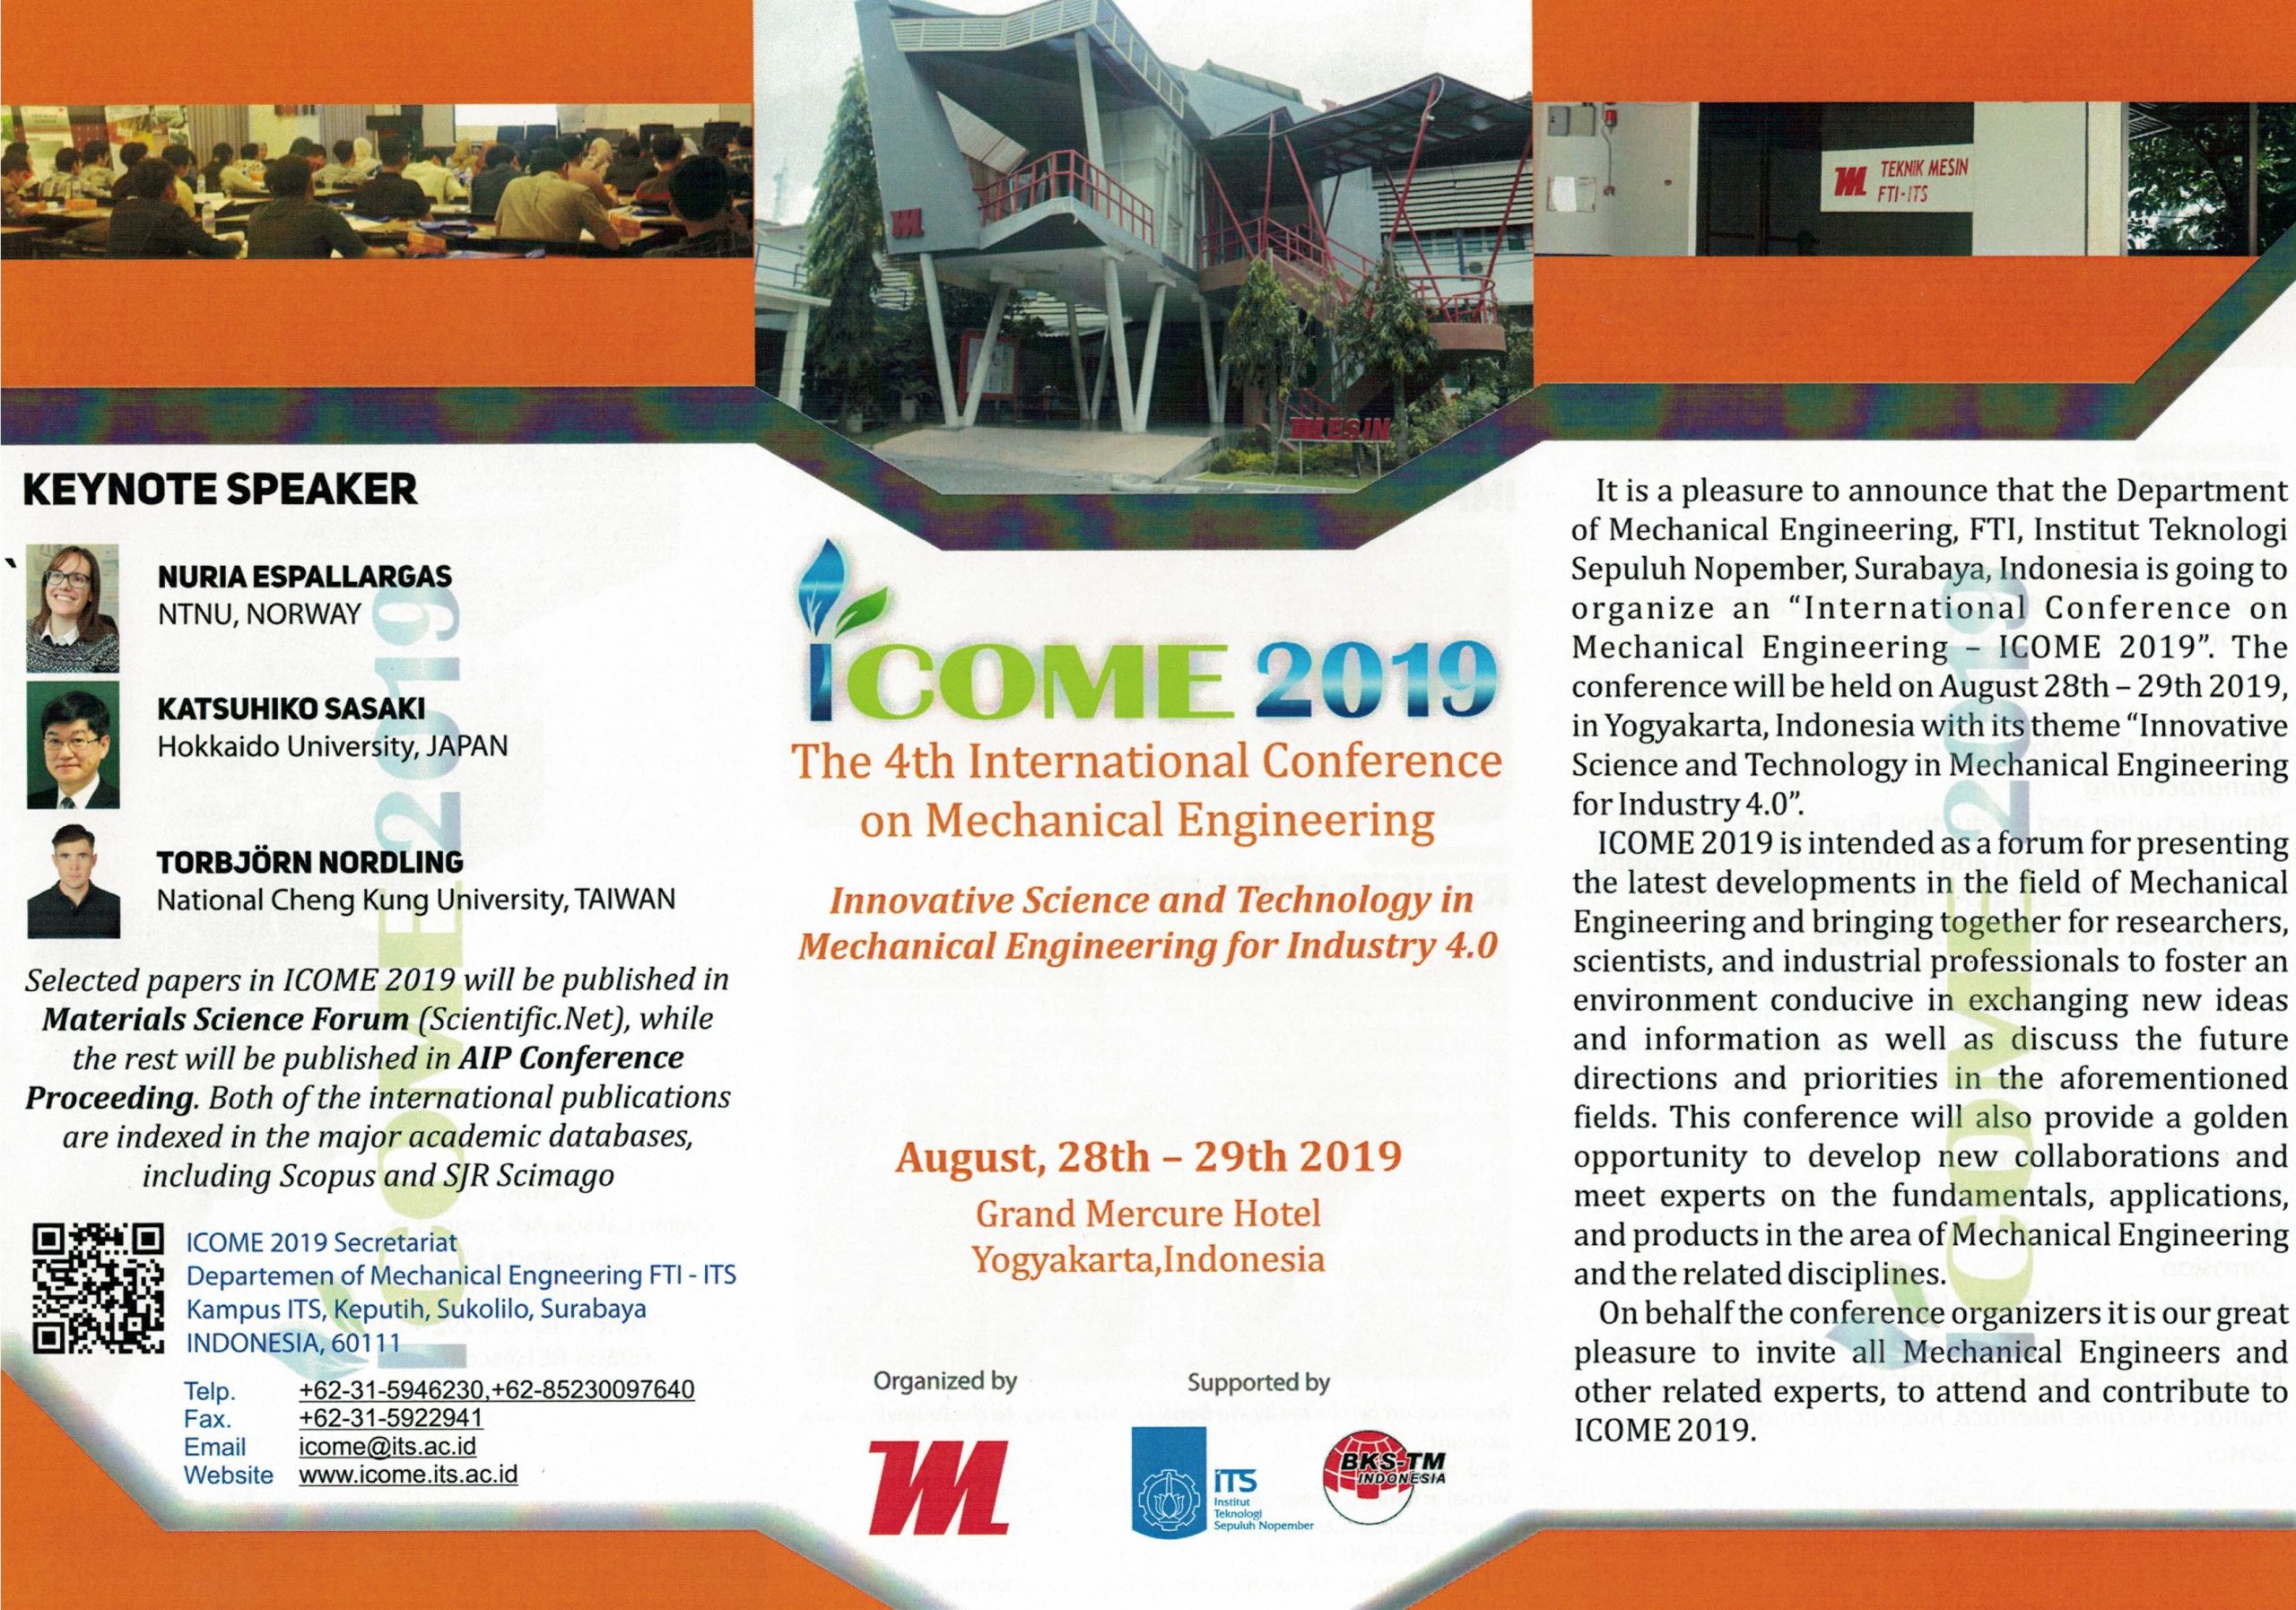 ICOME 2019 the 4th International Conference of Mechanical Engineering